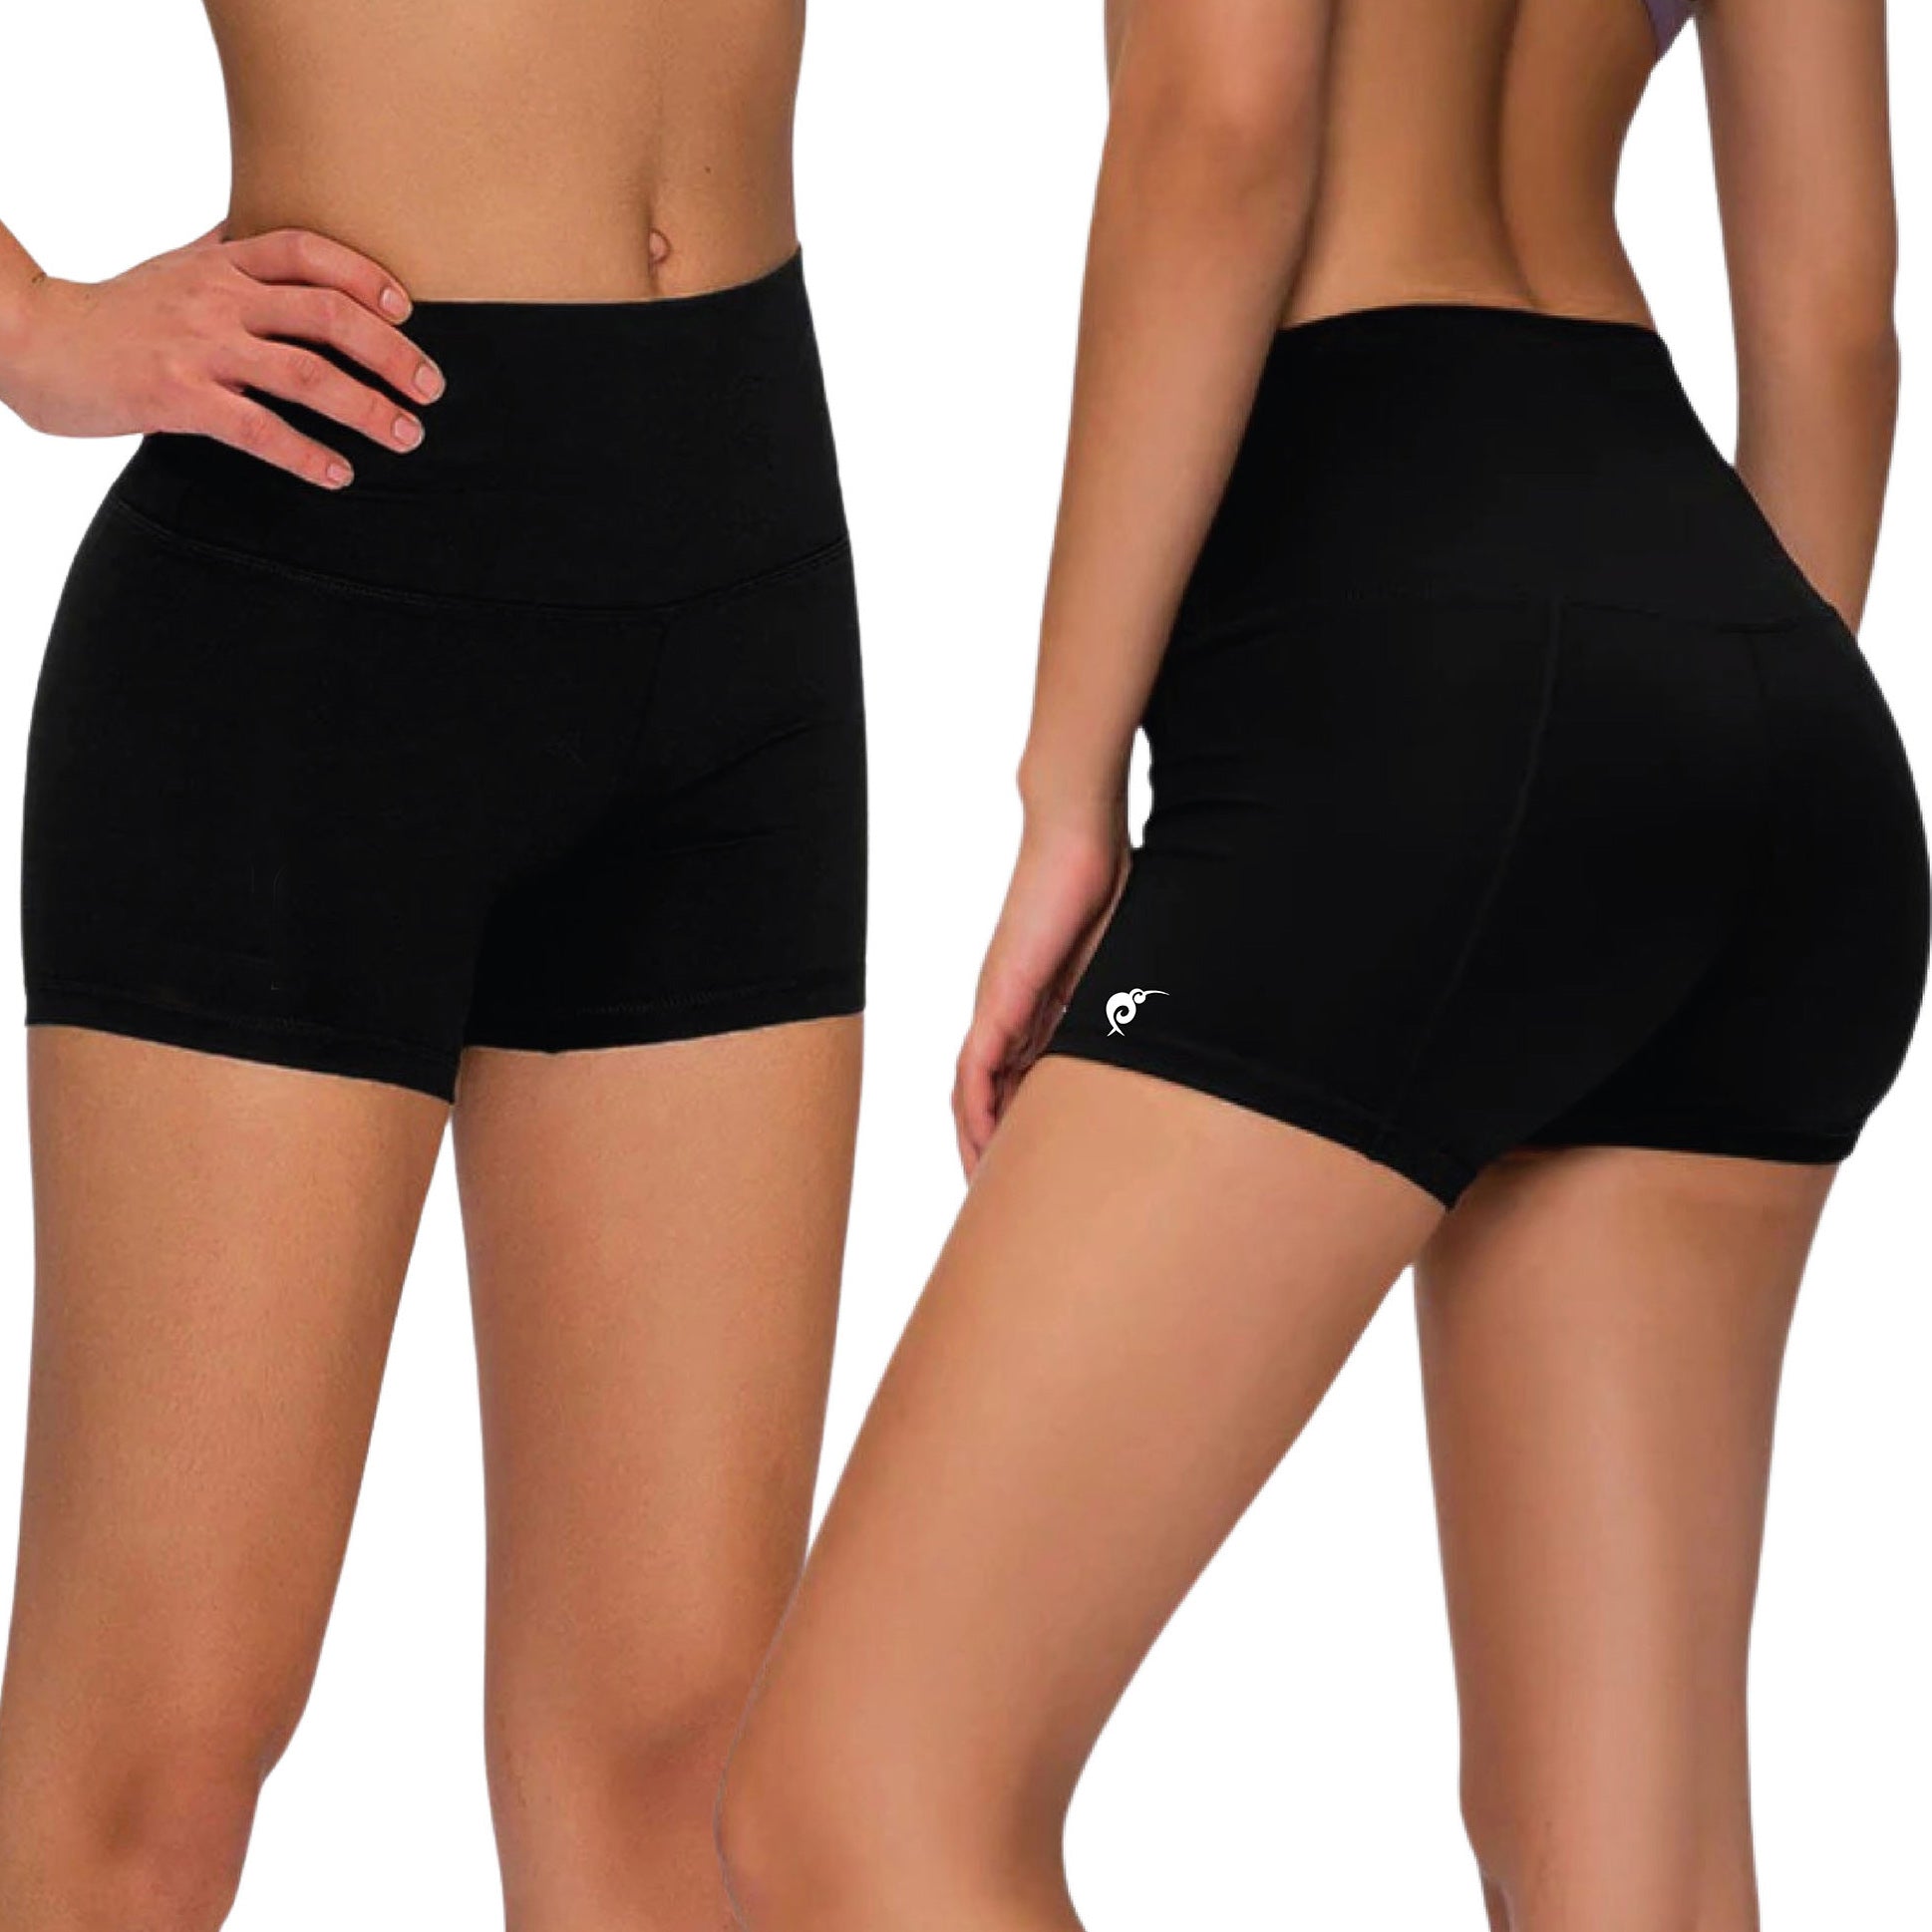 Kiwi Teamwear Black Fitted Lycra Shorts - CLEARANCE SPECIAL